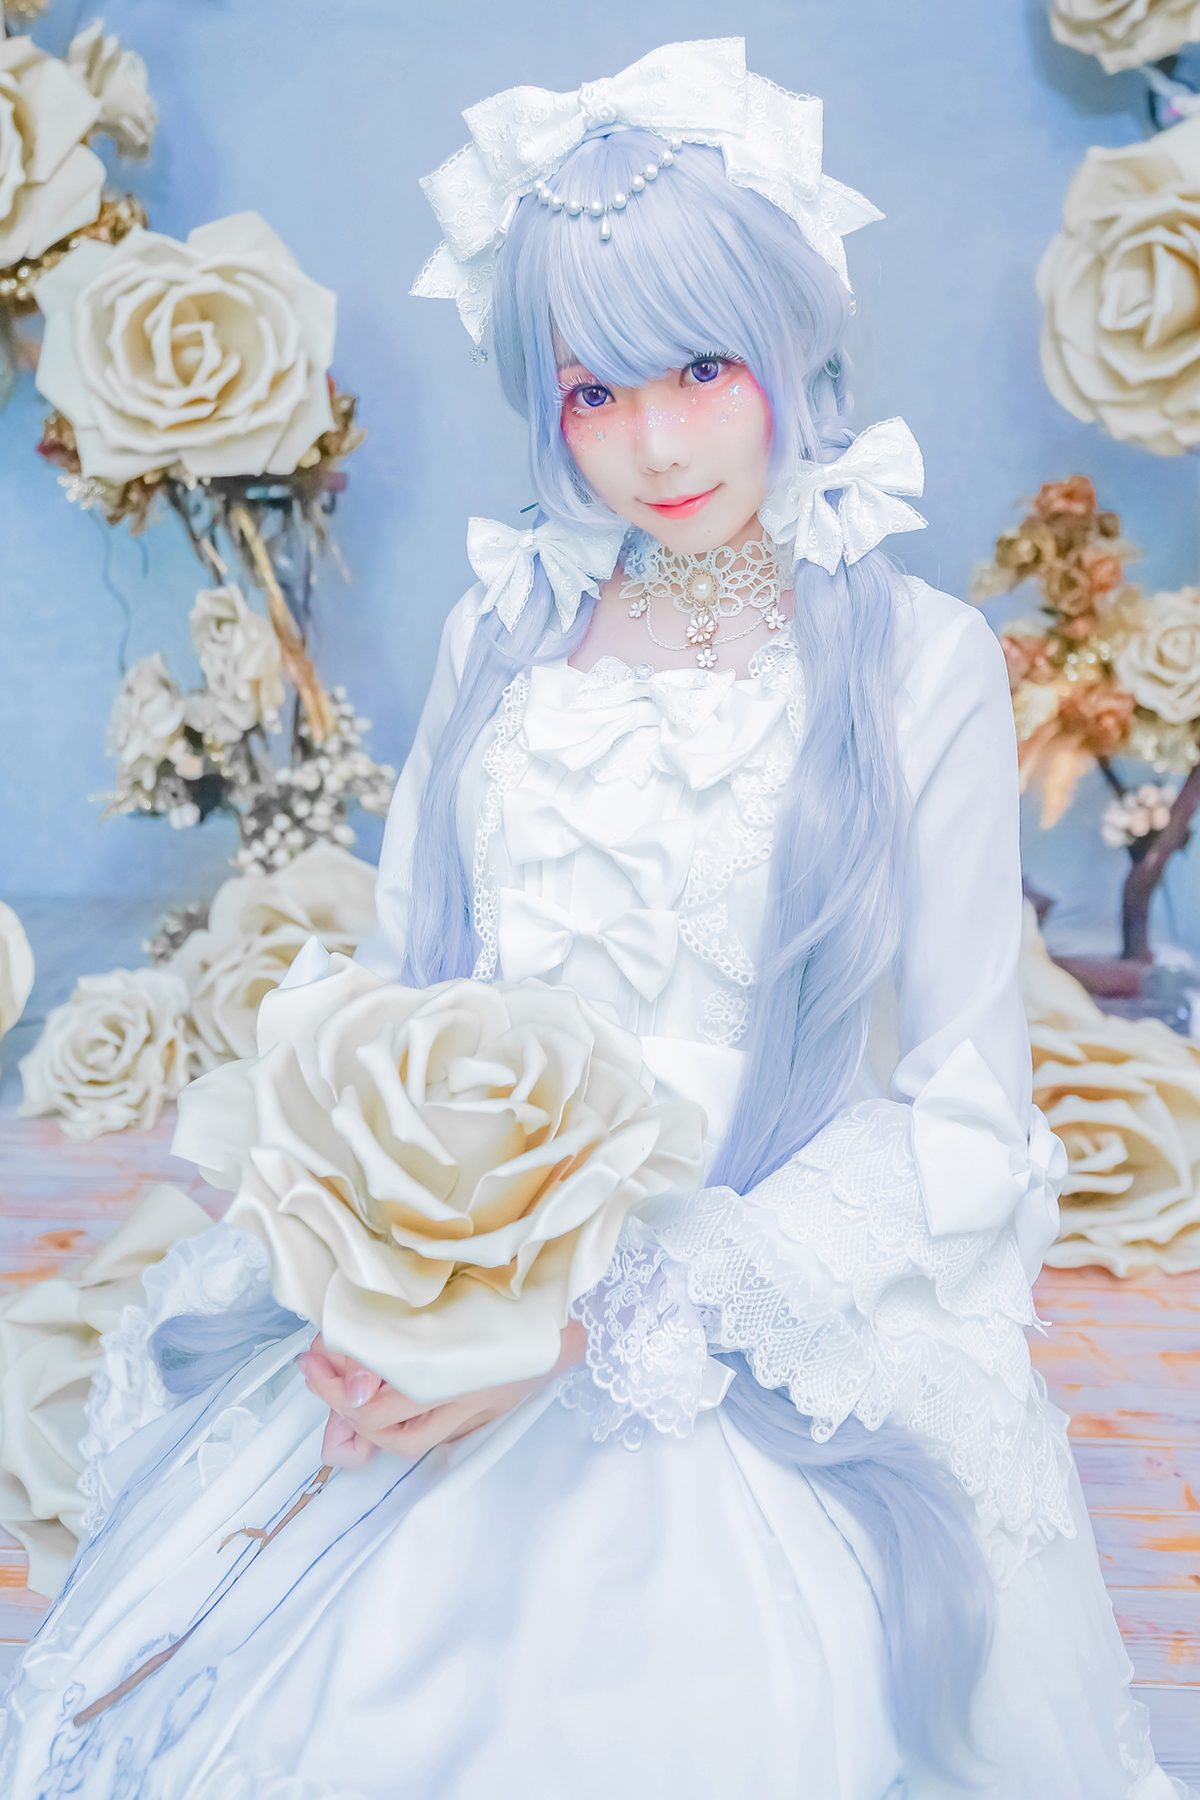 Coser@Ely_eee ElyEE子 TUESDAY TWINTAIL A 0043 7381794036.jpg